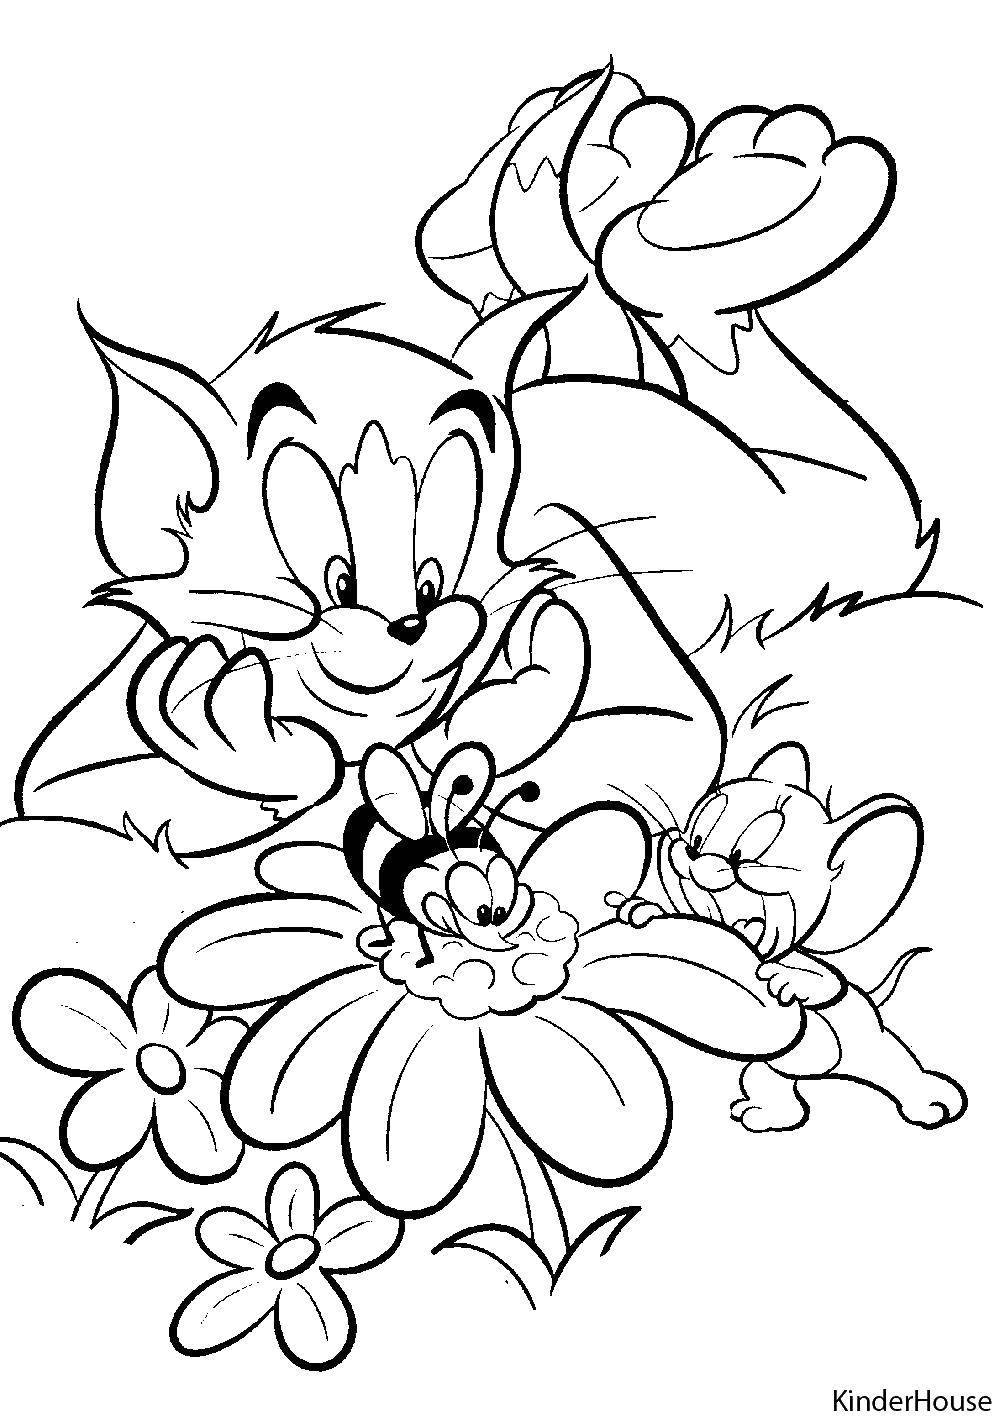 Coloring Tom and Jerry watching the bee. Category Tom and Jerry. Tags:  Character cartoon, Tom and Jerry.